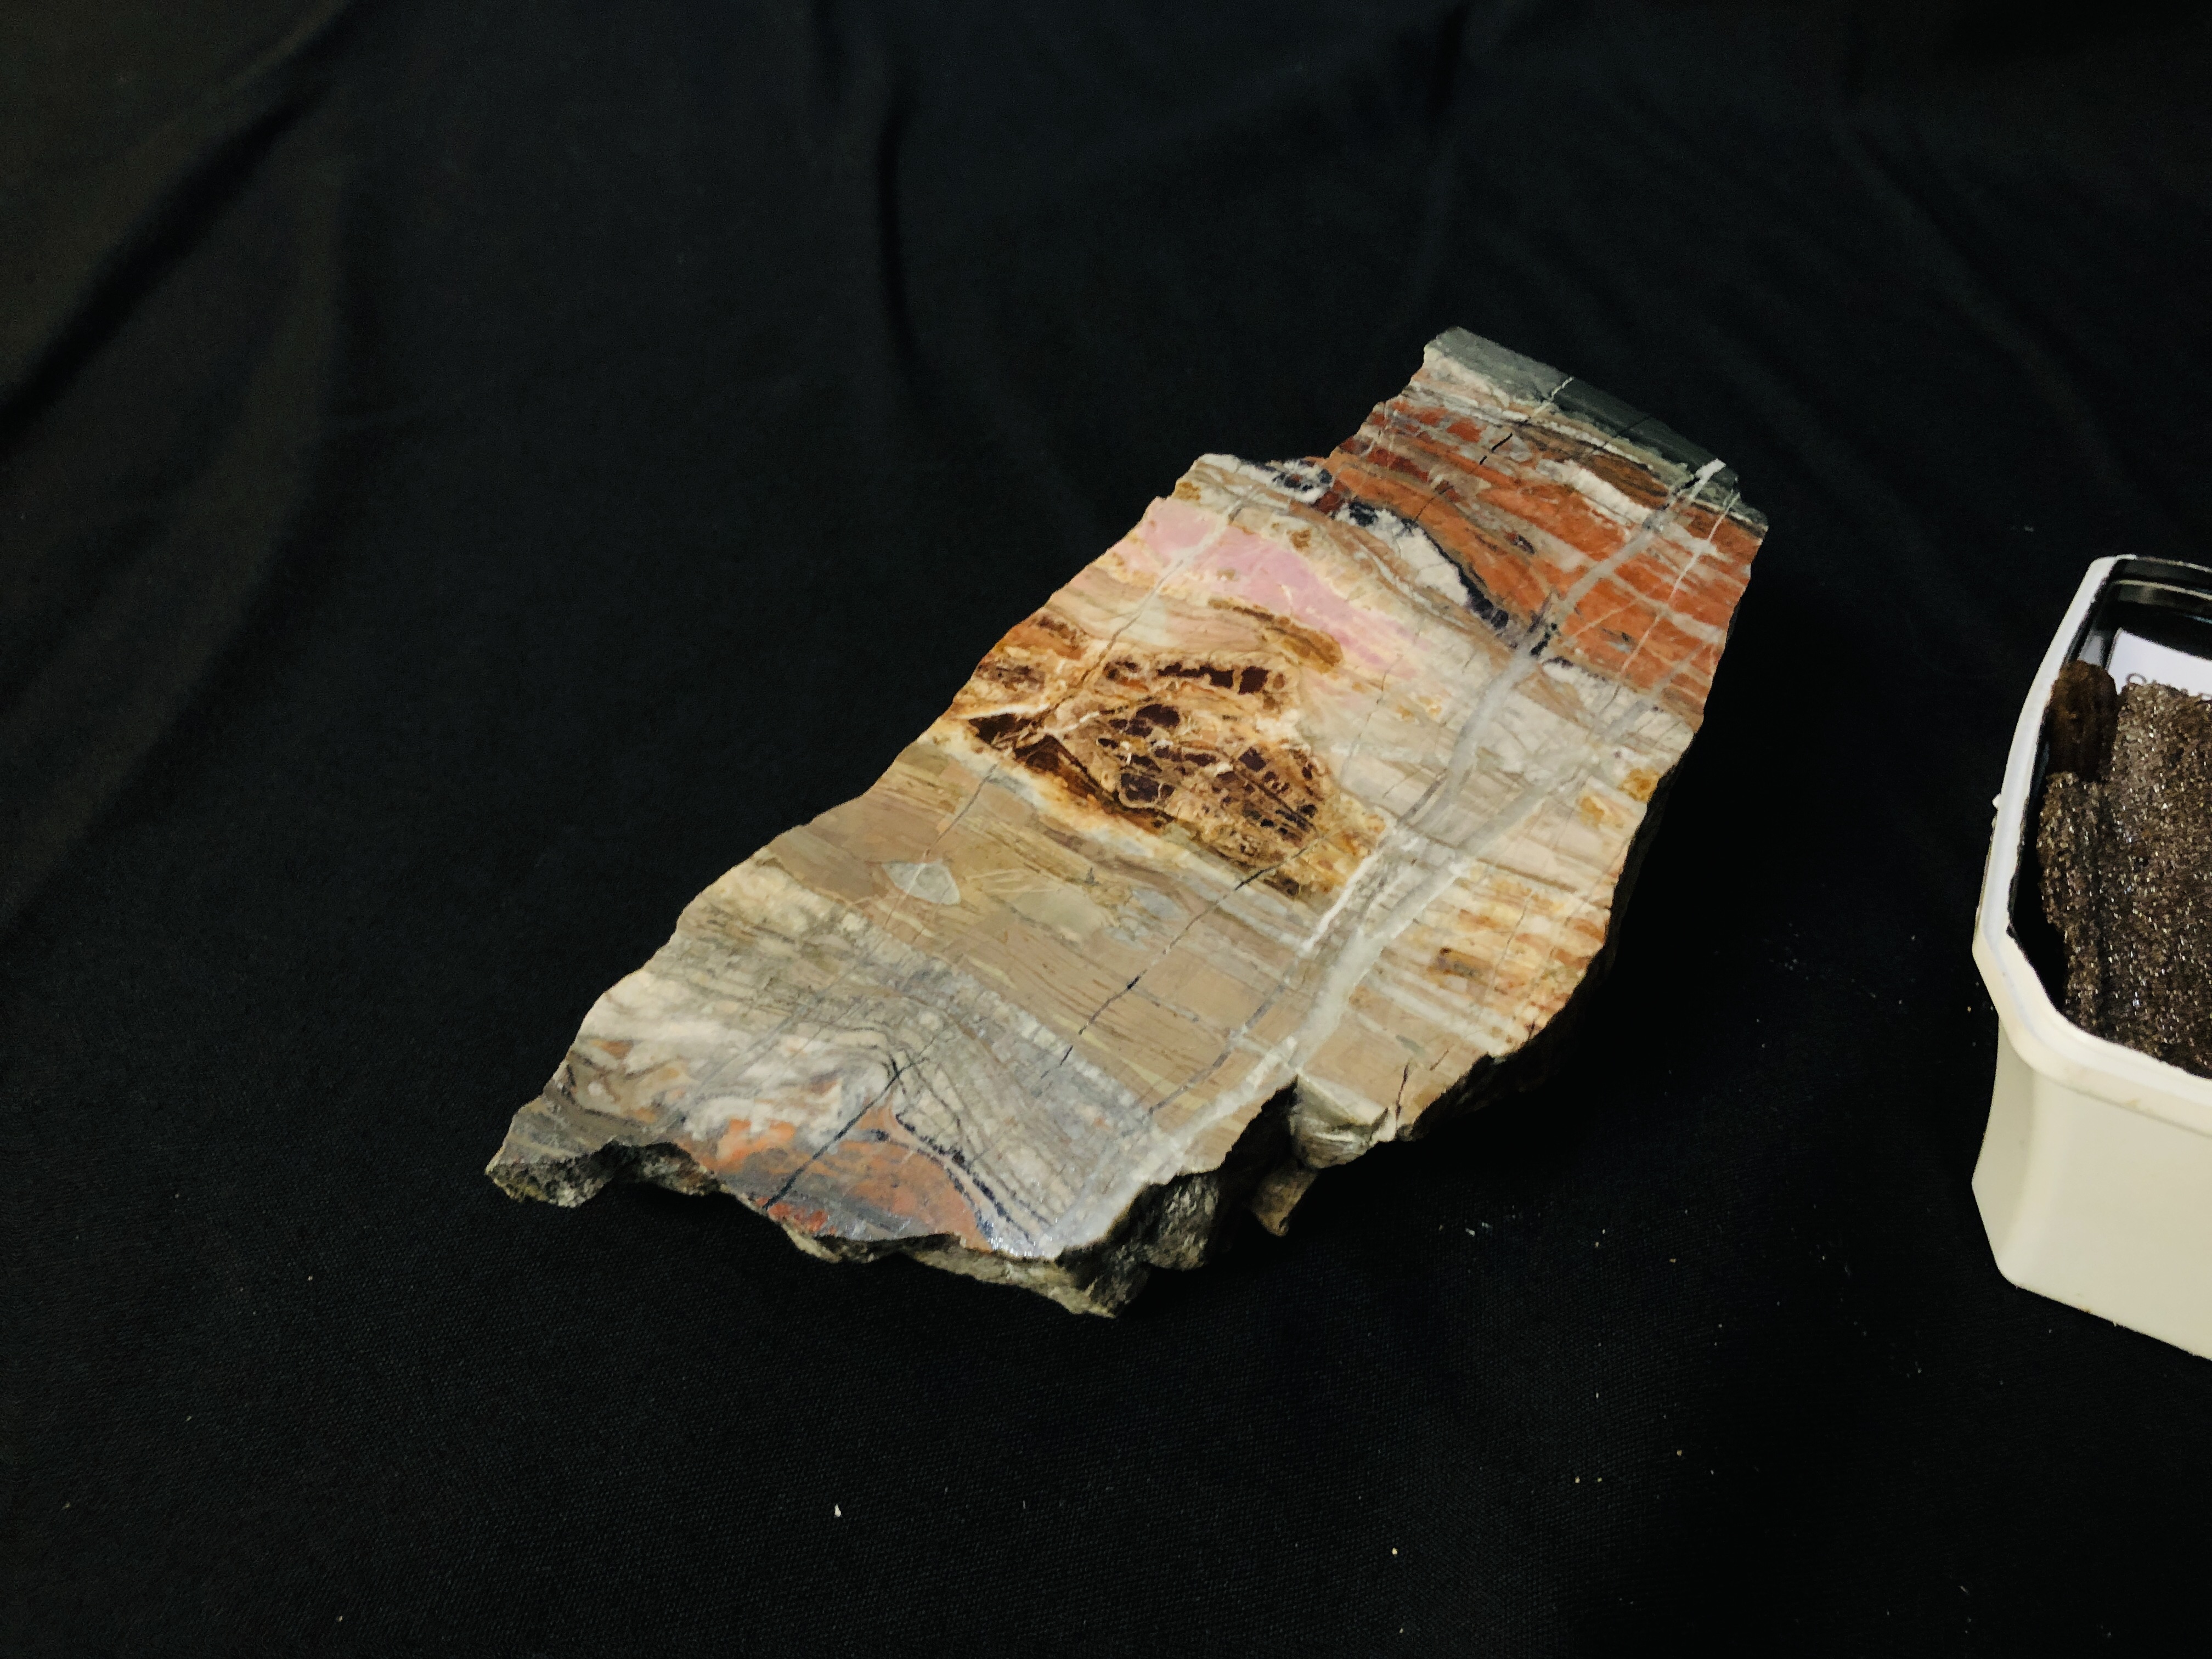 A GROUP OF 3 POLISHED SEGMENT TO INCLUDE FOSSILISED WOOD ALONG WITH A QUARTZ COVERING PETRIFIED - Image 5 of 5